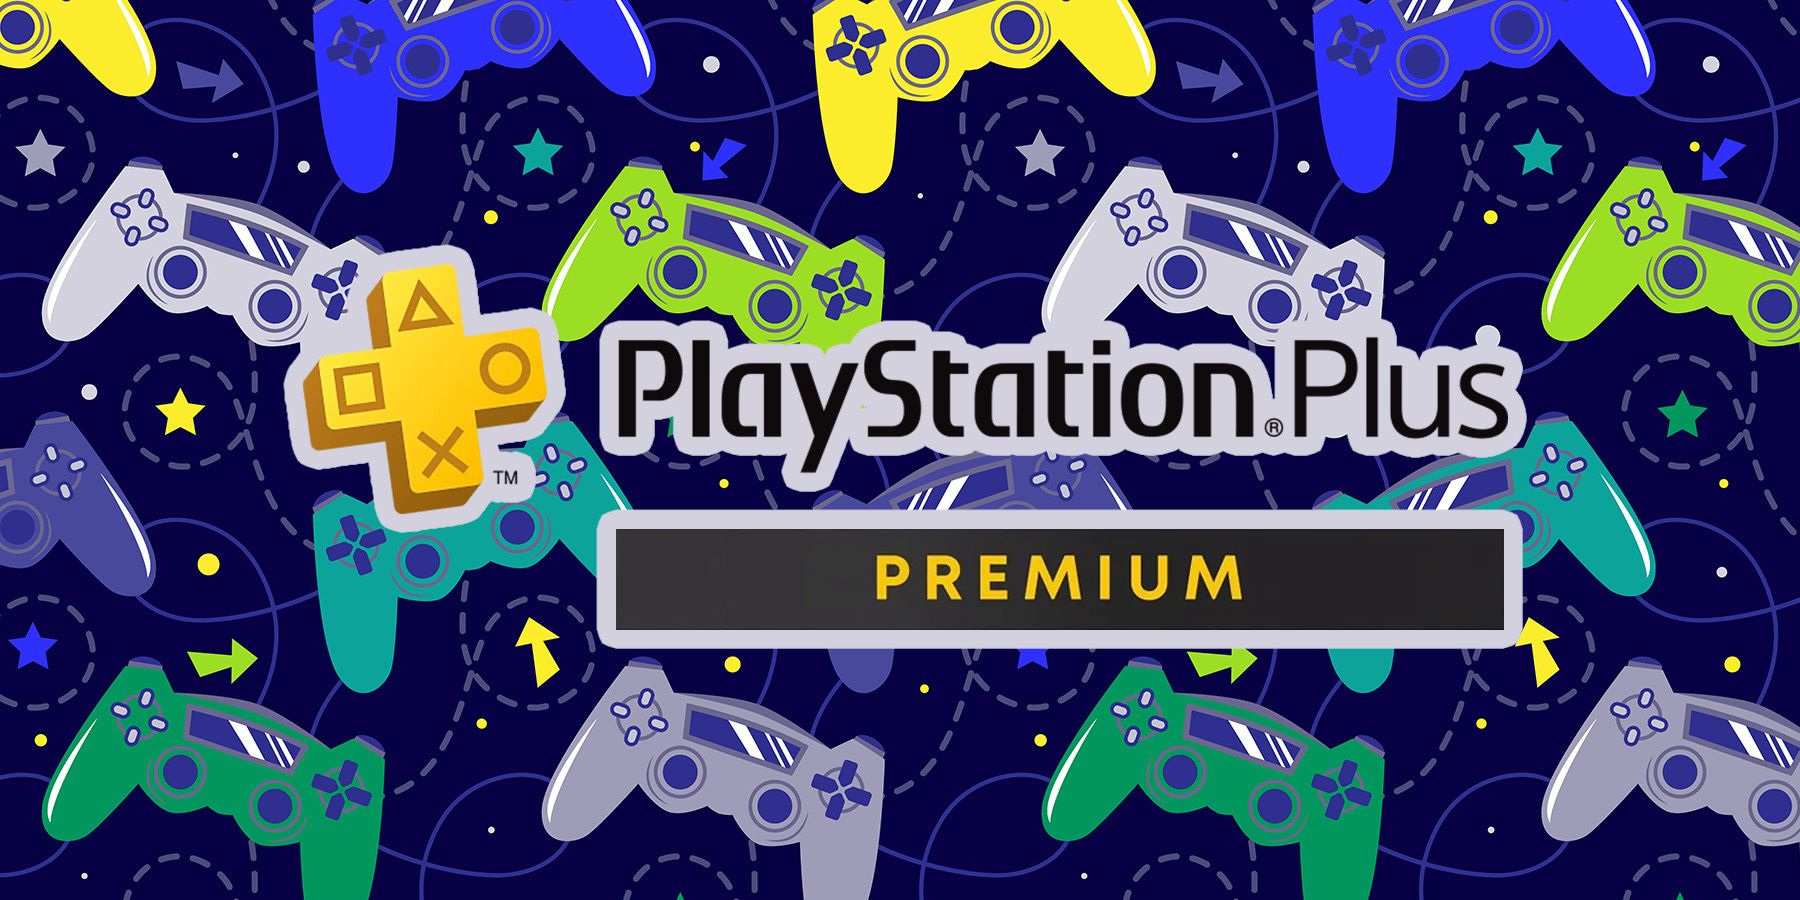 PlayStation Plus Season of Play Includes Free Multiplayer Weekend